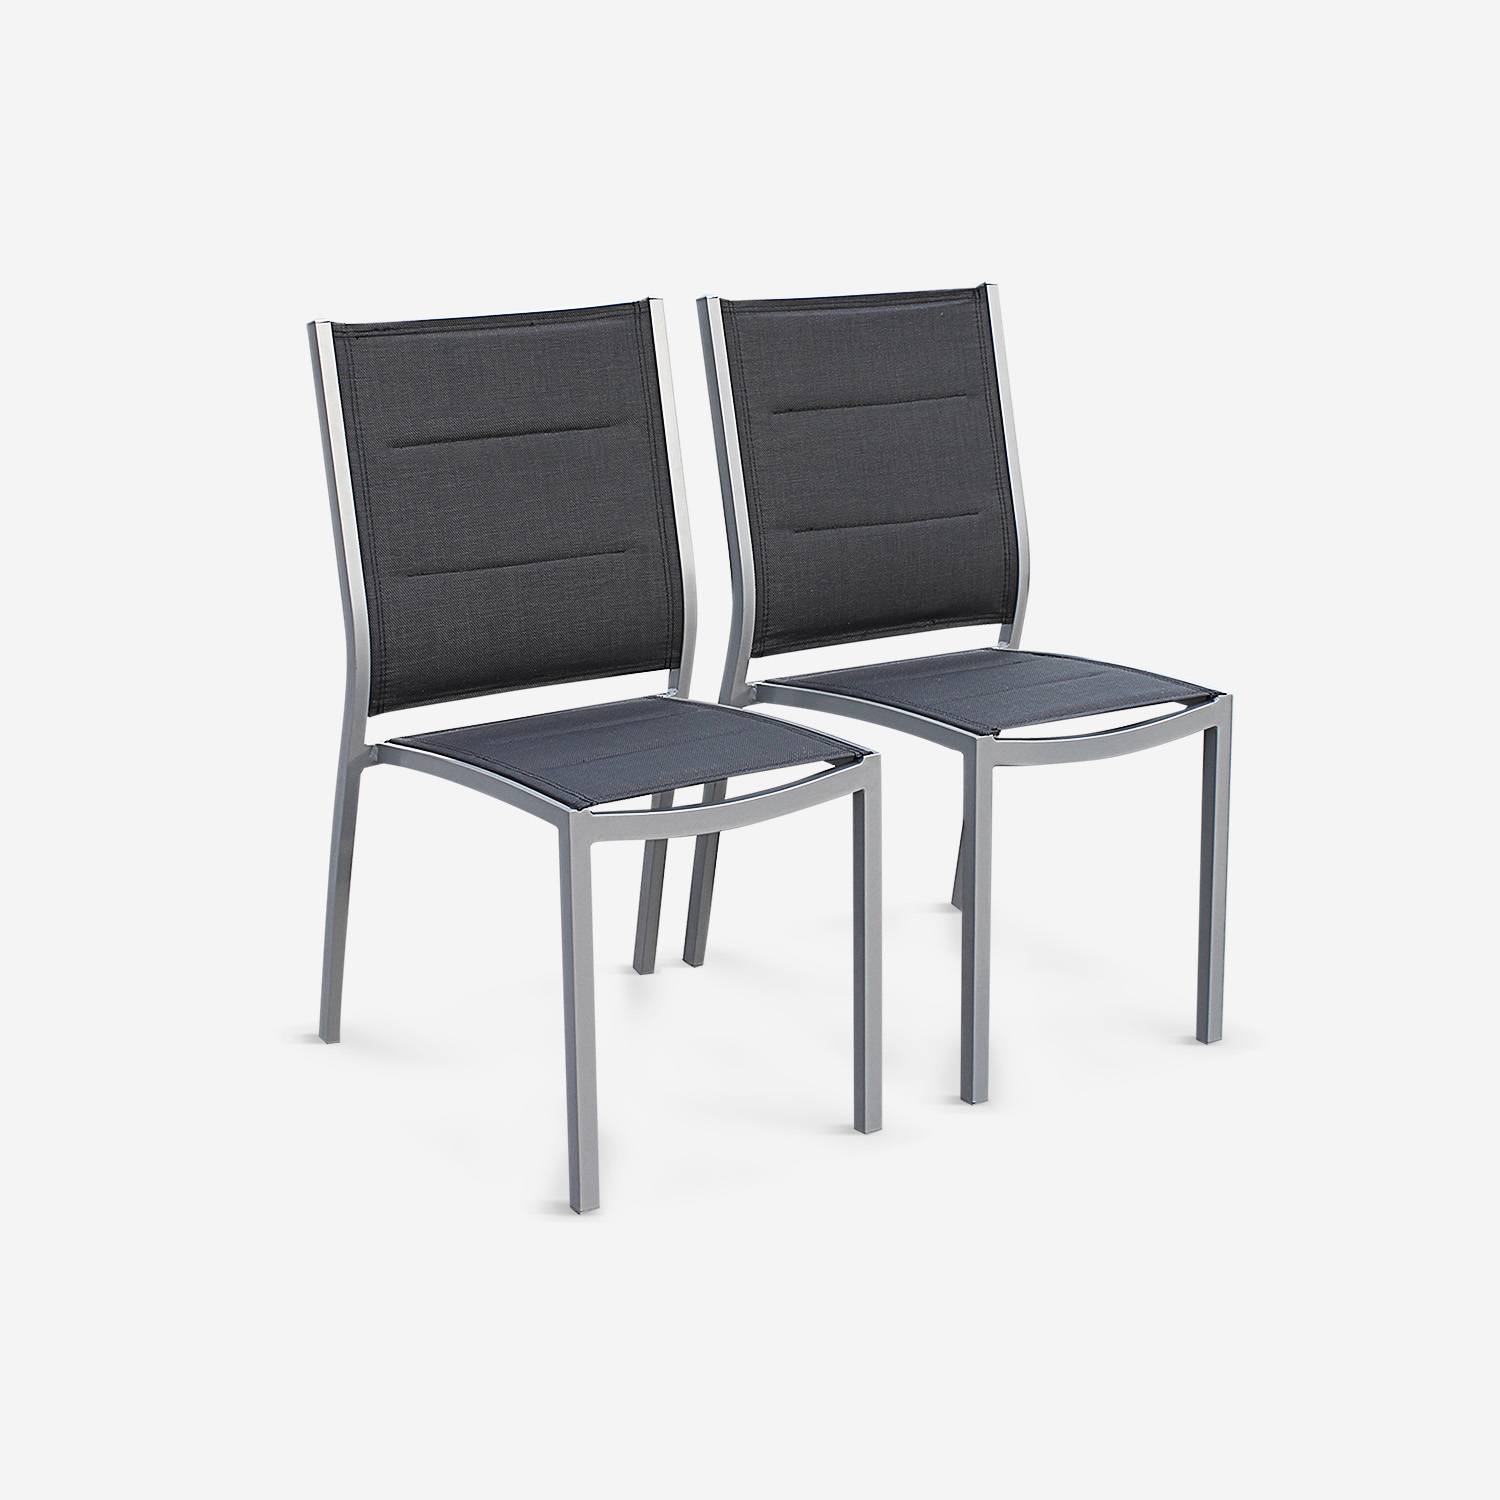 Set of 2 stackable chairs - Chicago - Grey aluminium and Charcoal Gray textilene Photo3